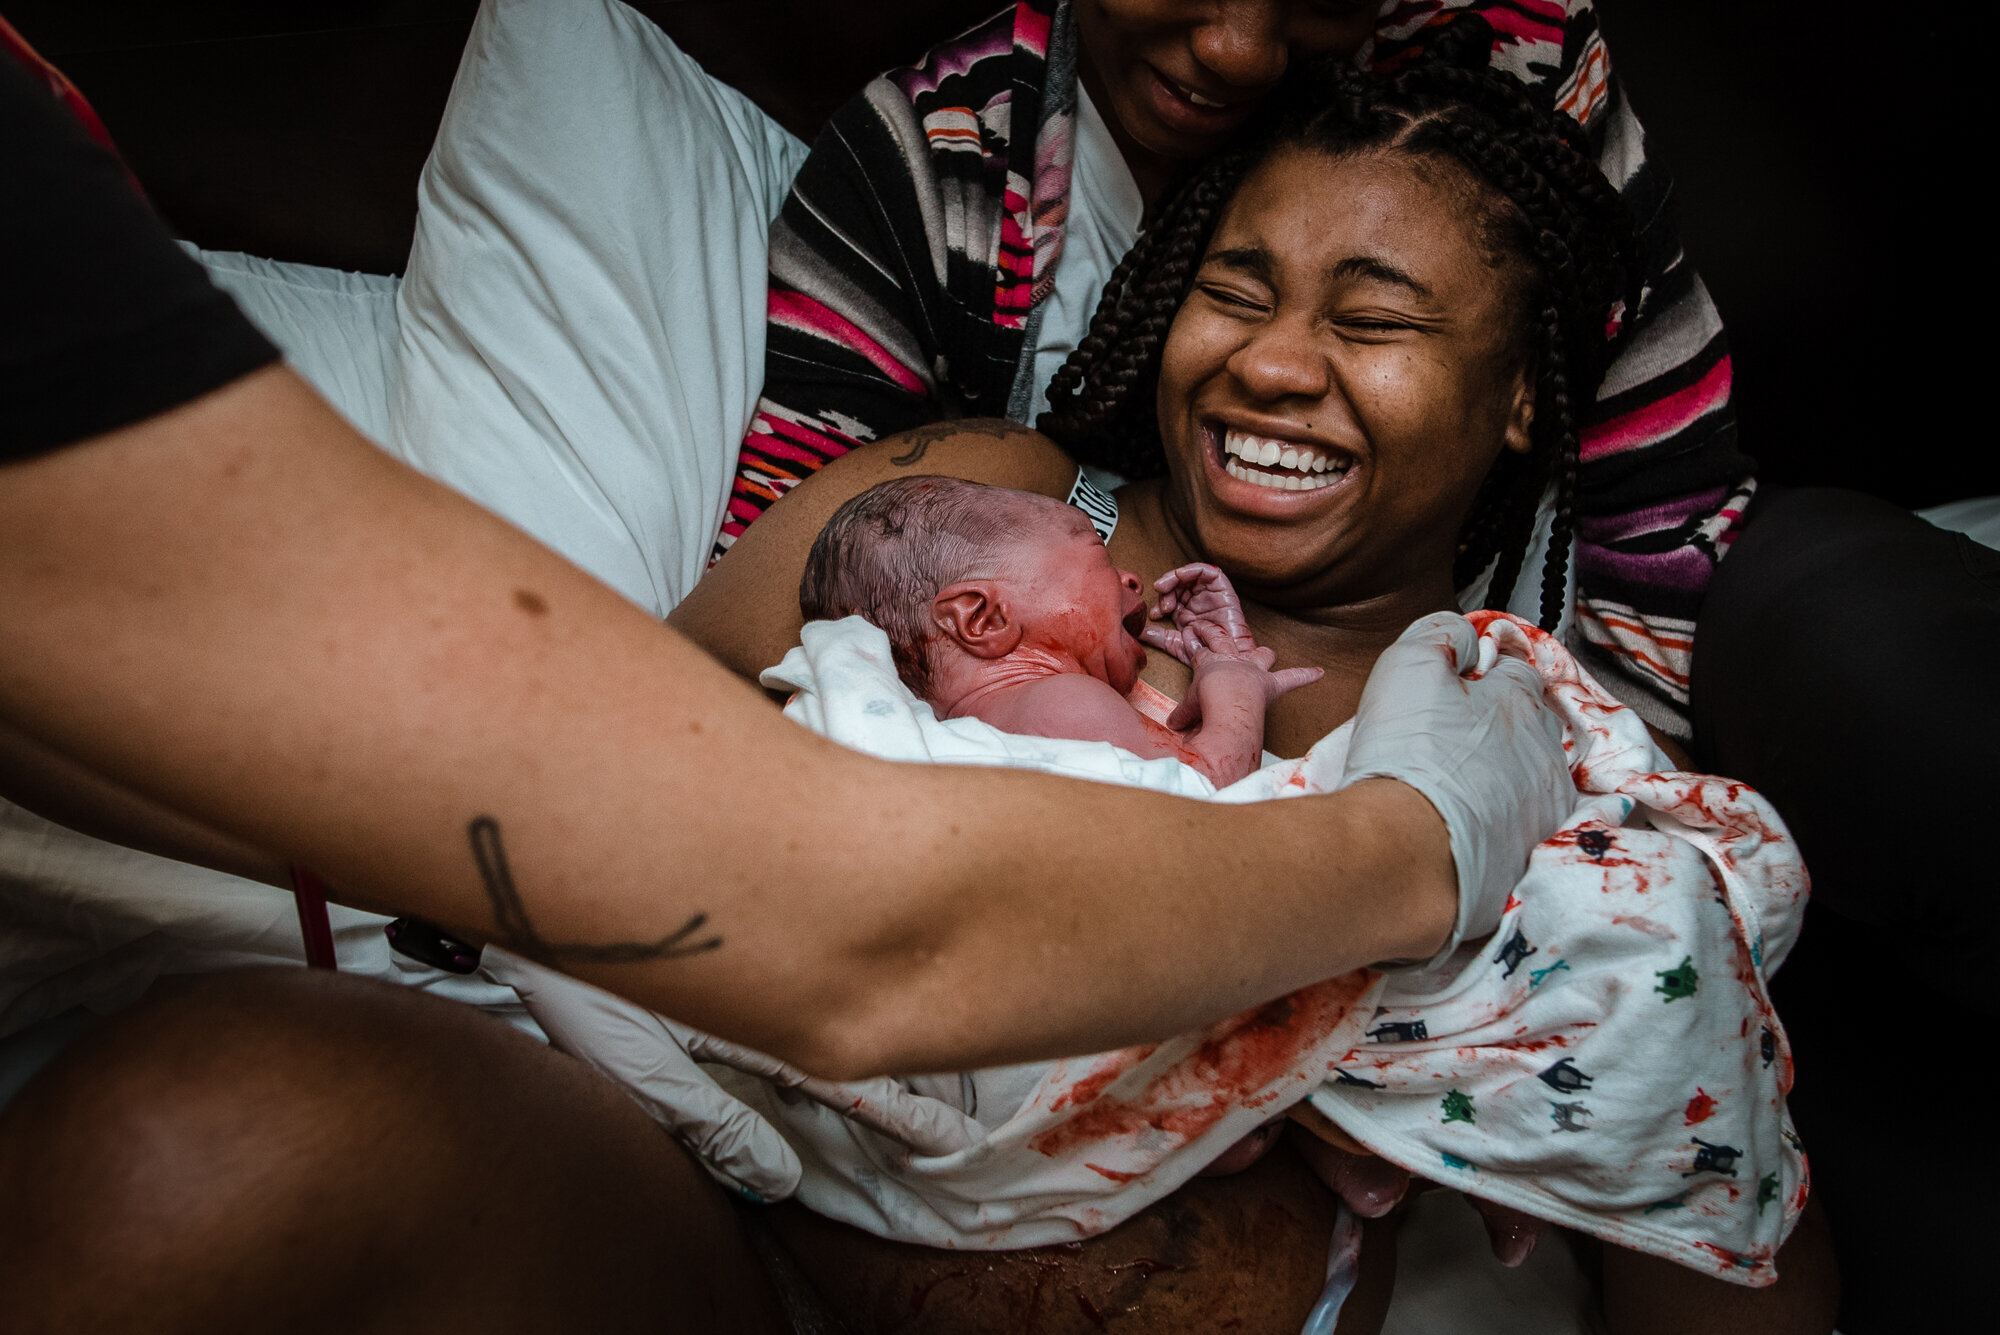 Gather+Birth+Cooperative-+Photography+and+Doula+Support+-August+14,+2019-012143.jpg